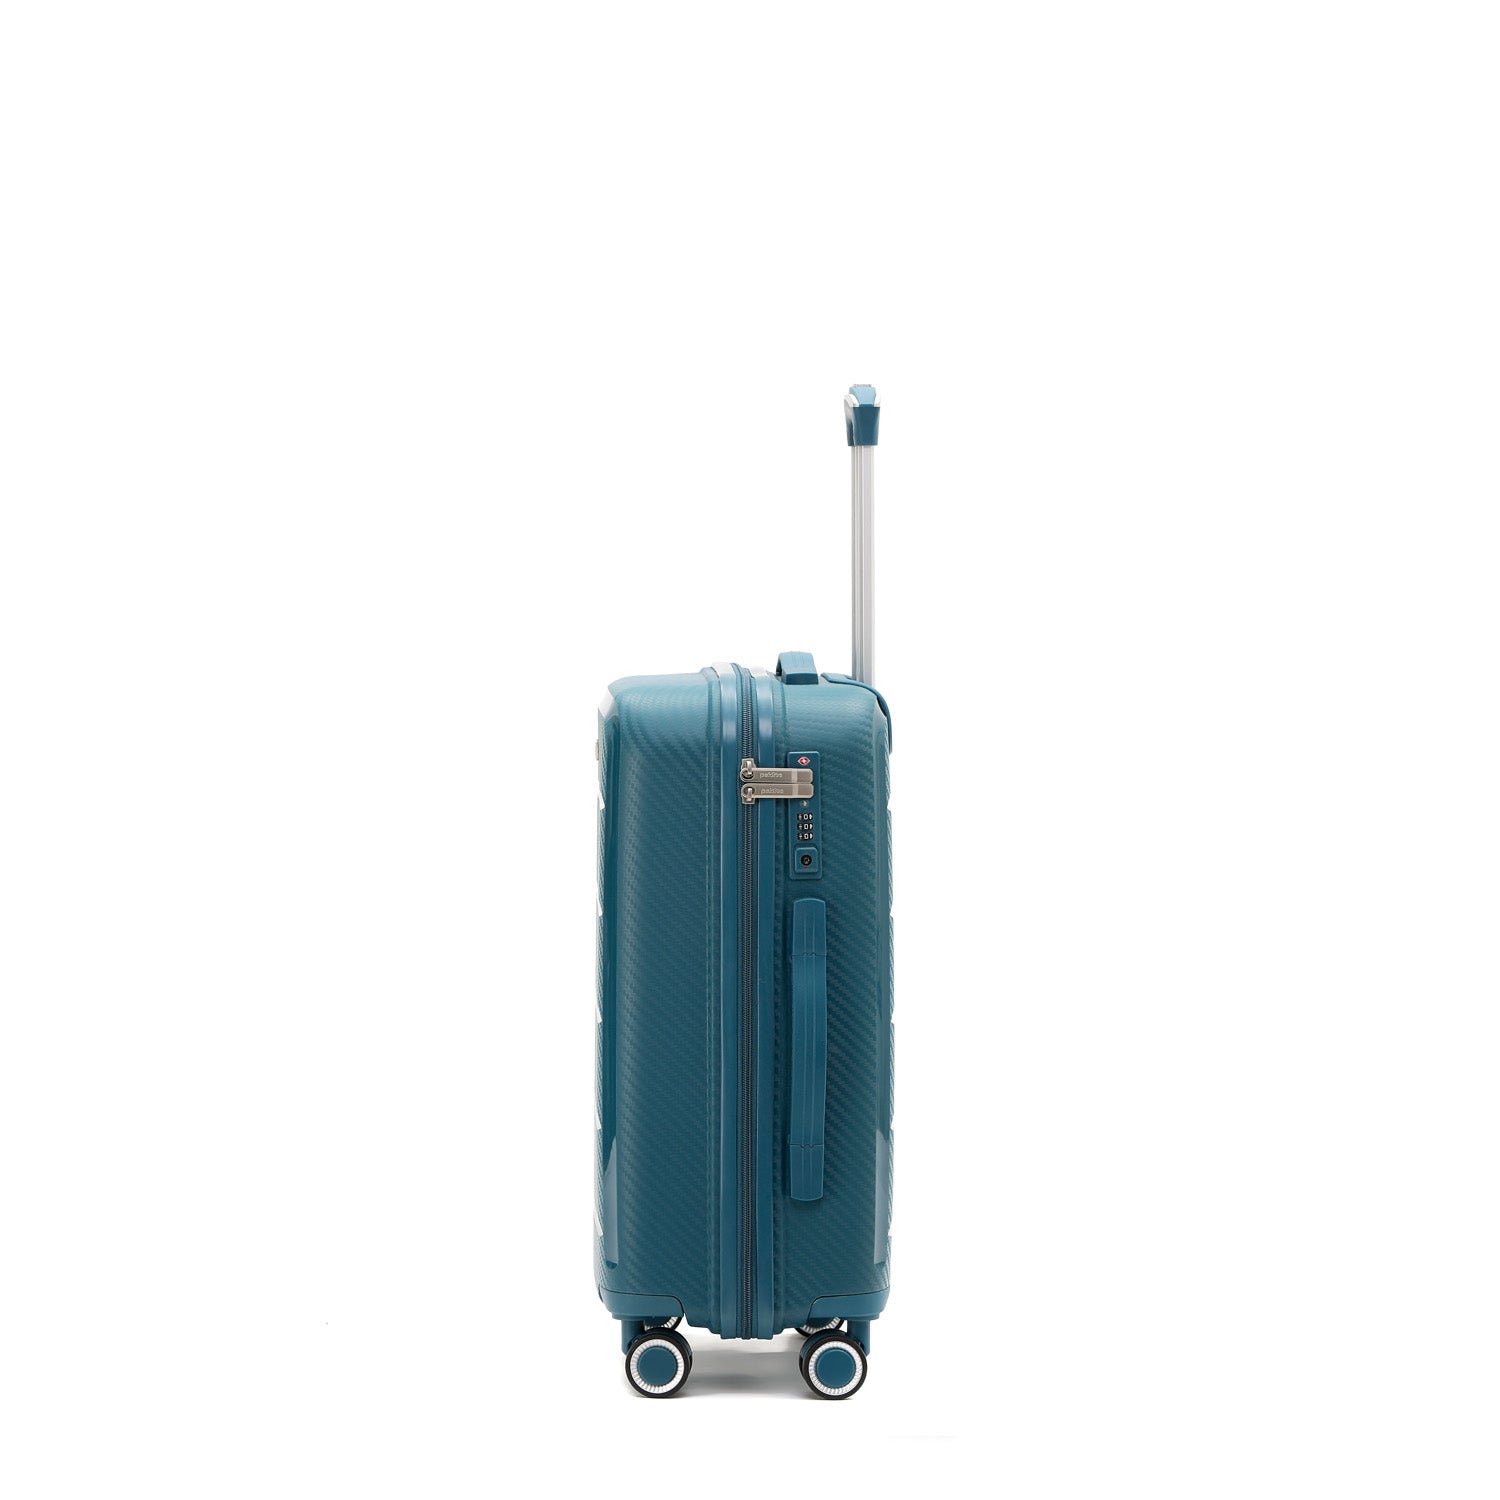 Paklite - PA7350 small spinner suitcase - Blue-3